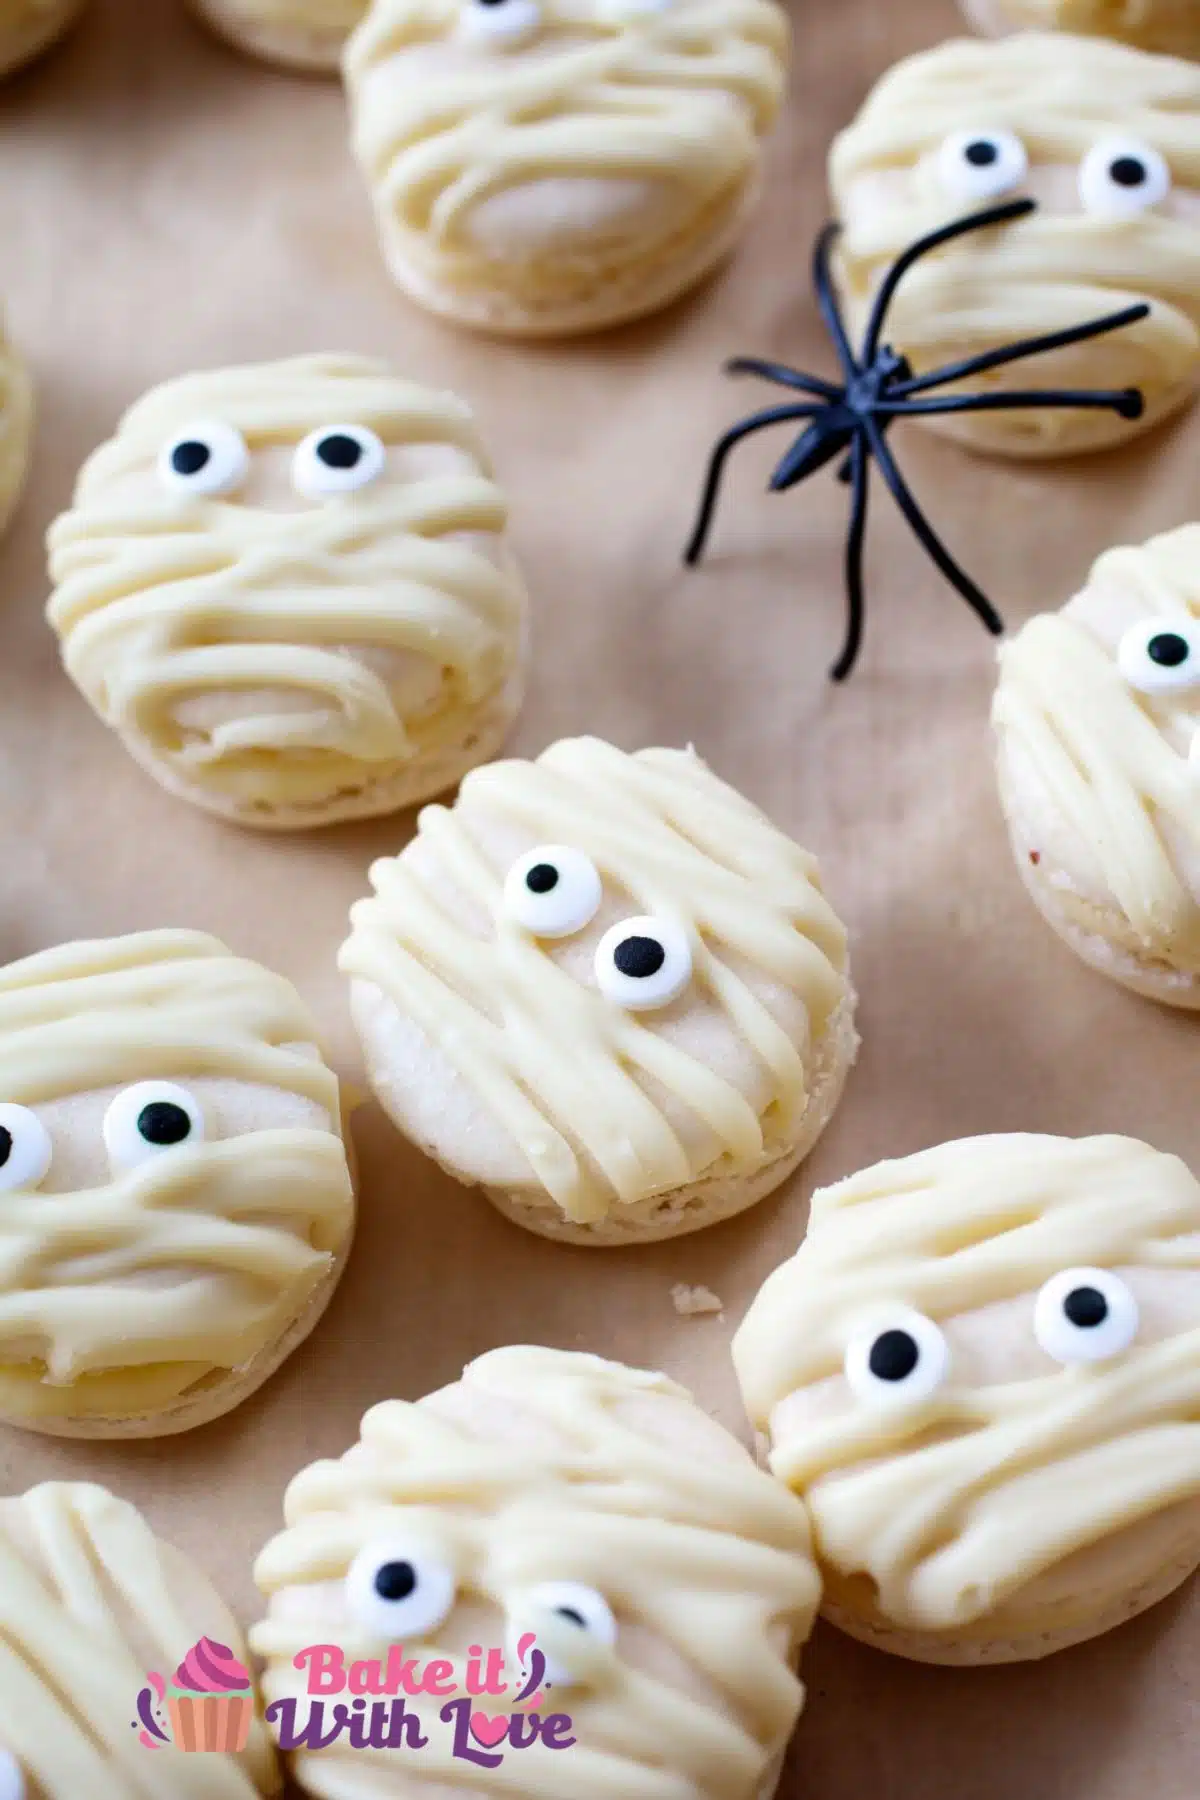 Halloween mummy macarons in a single layer with spider decorations.